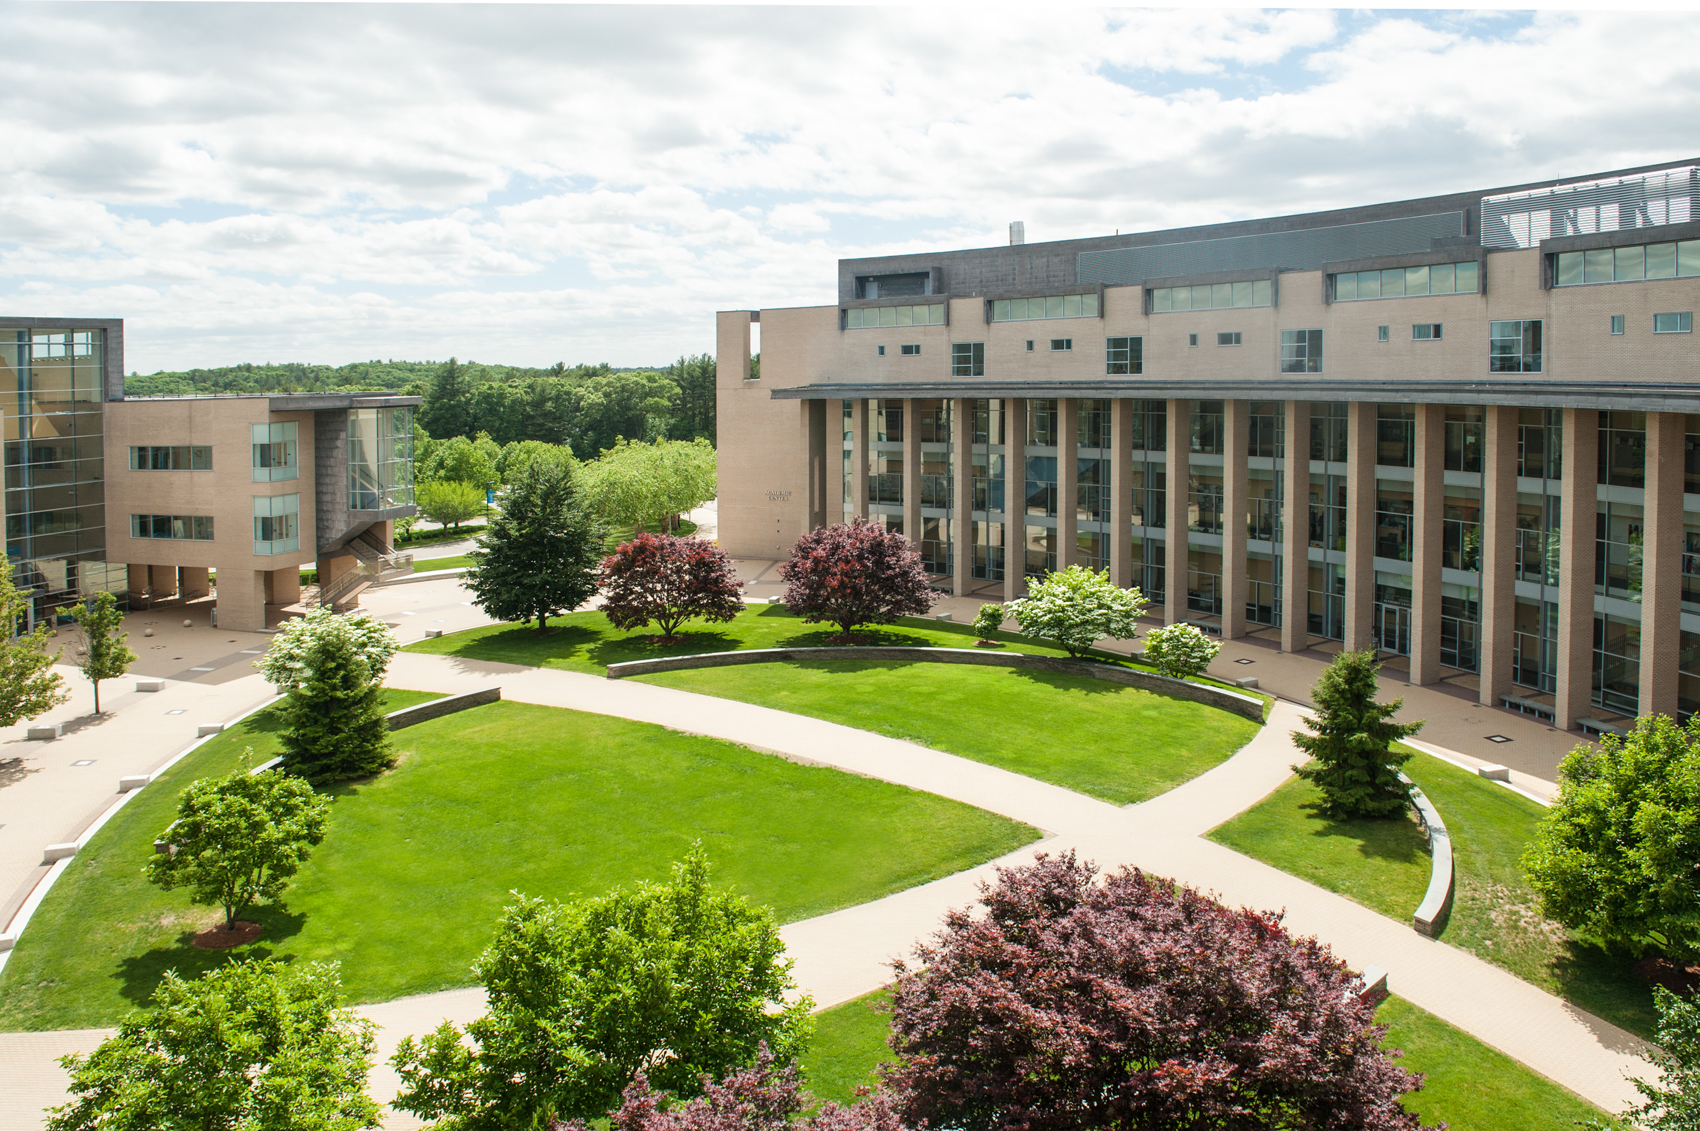 Picture of Olin College of Engineering Campus